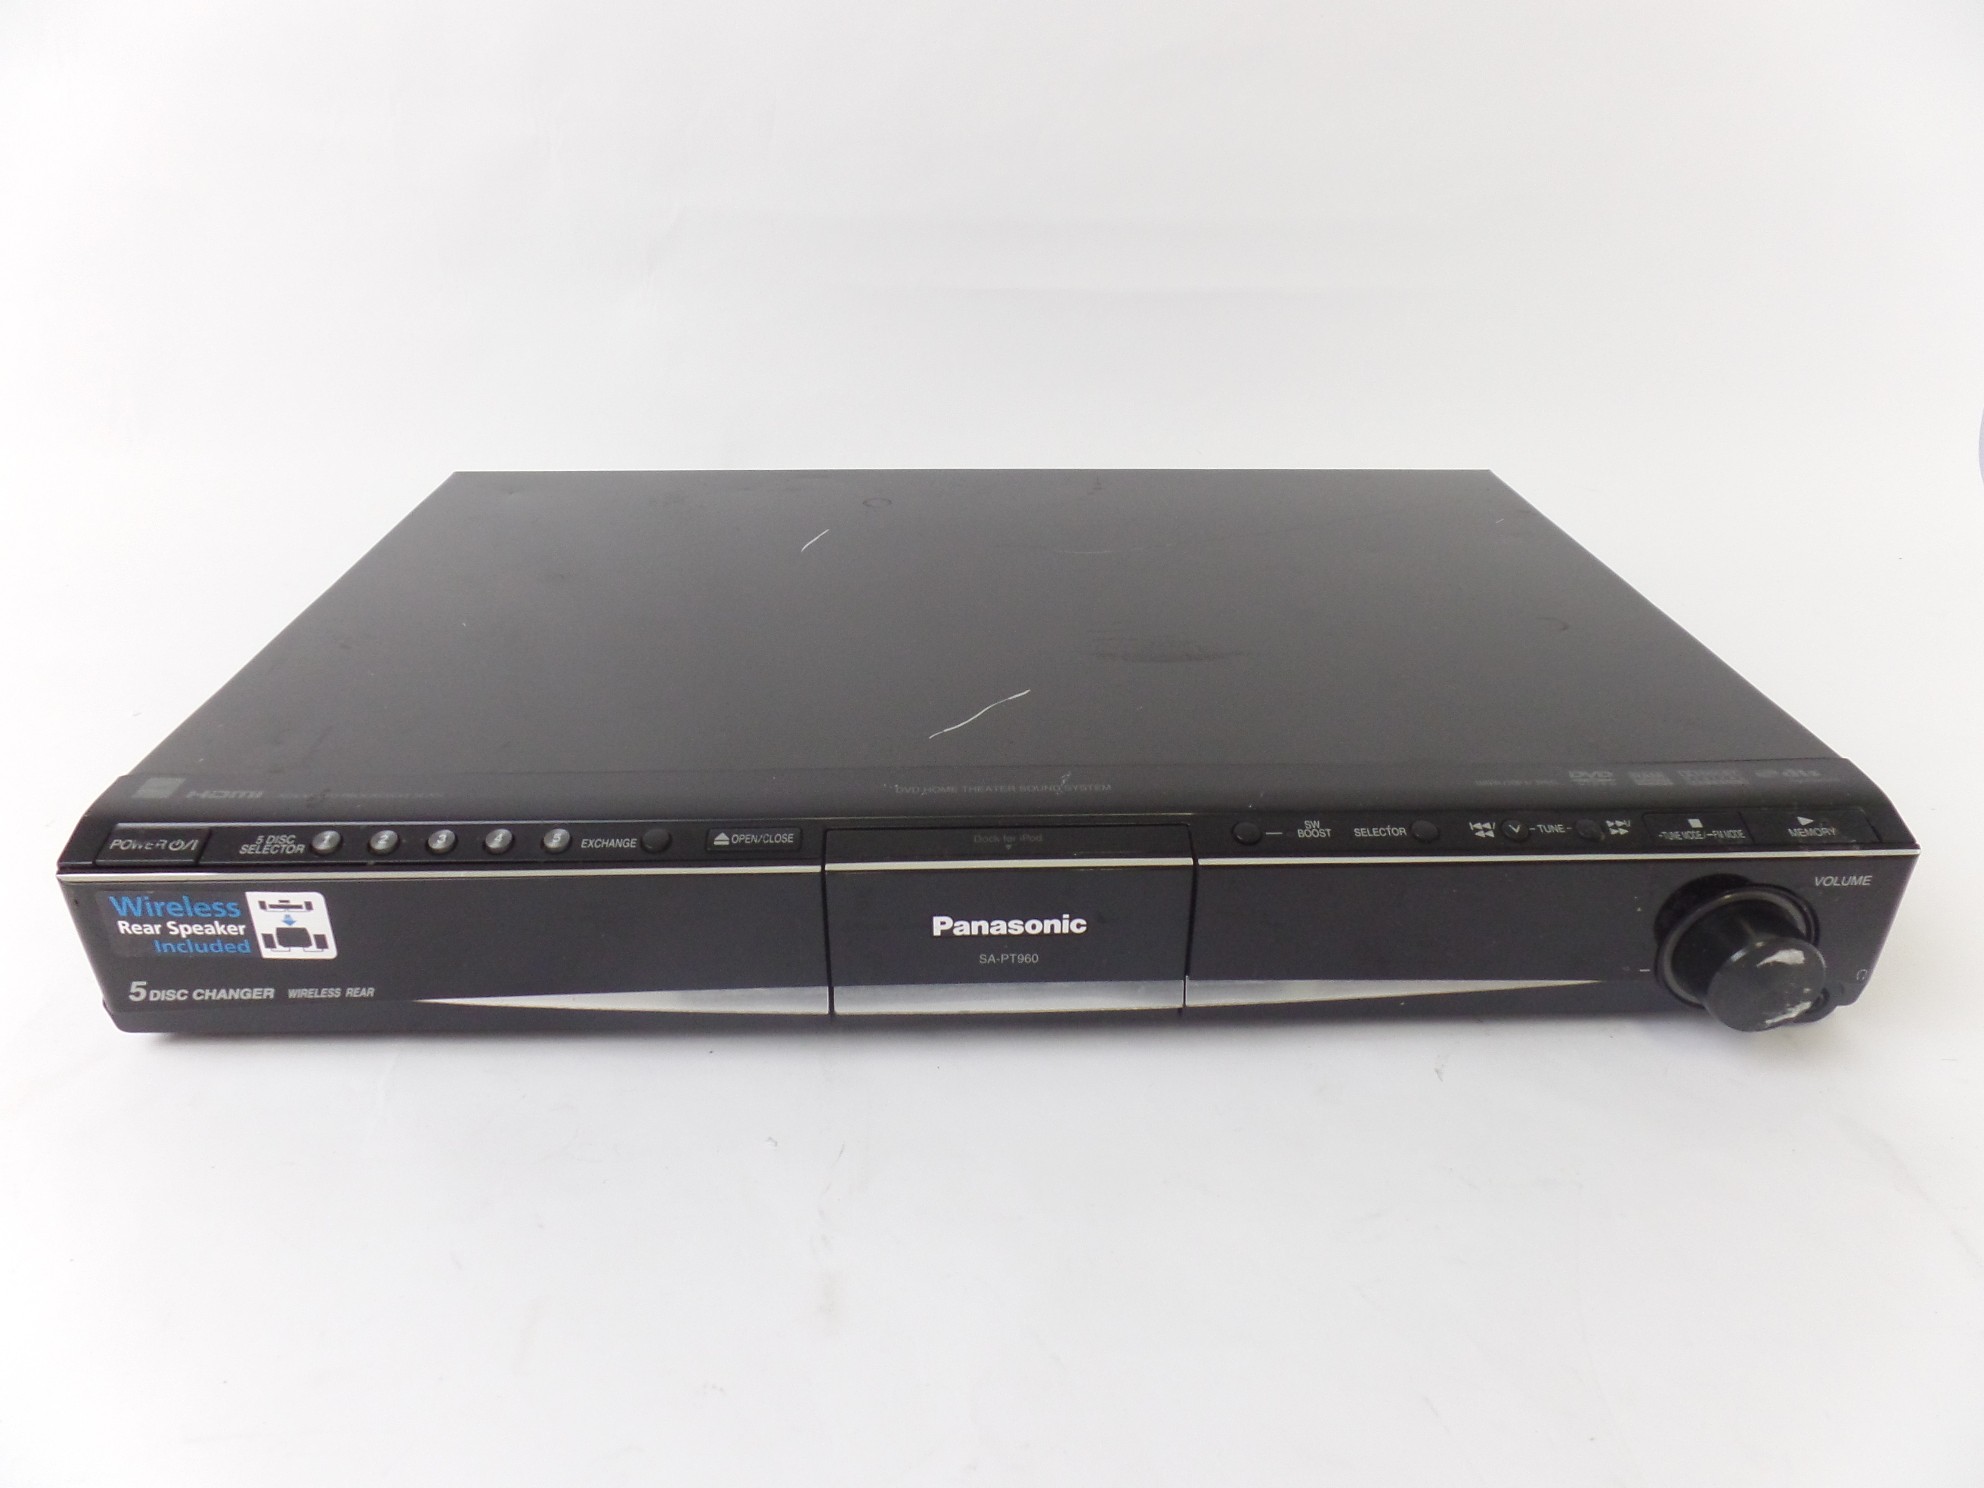 Panasonic Dvd Home Theater Sound System Sa Pt960 5 1 Channel Receiver For Parts